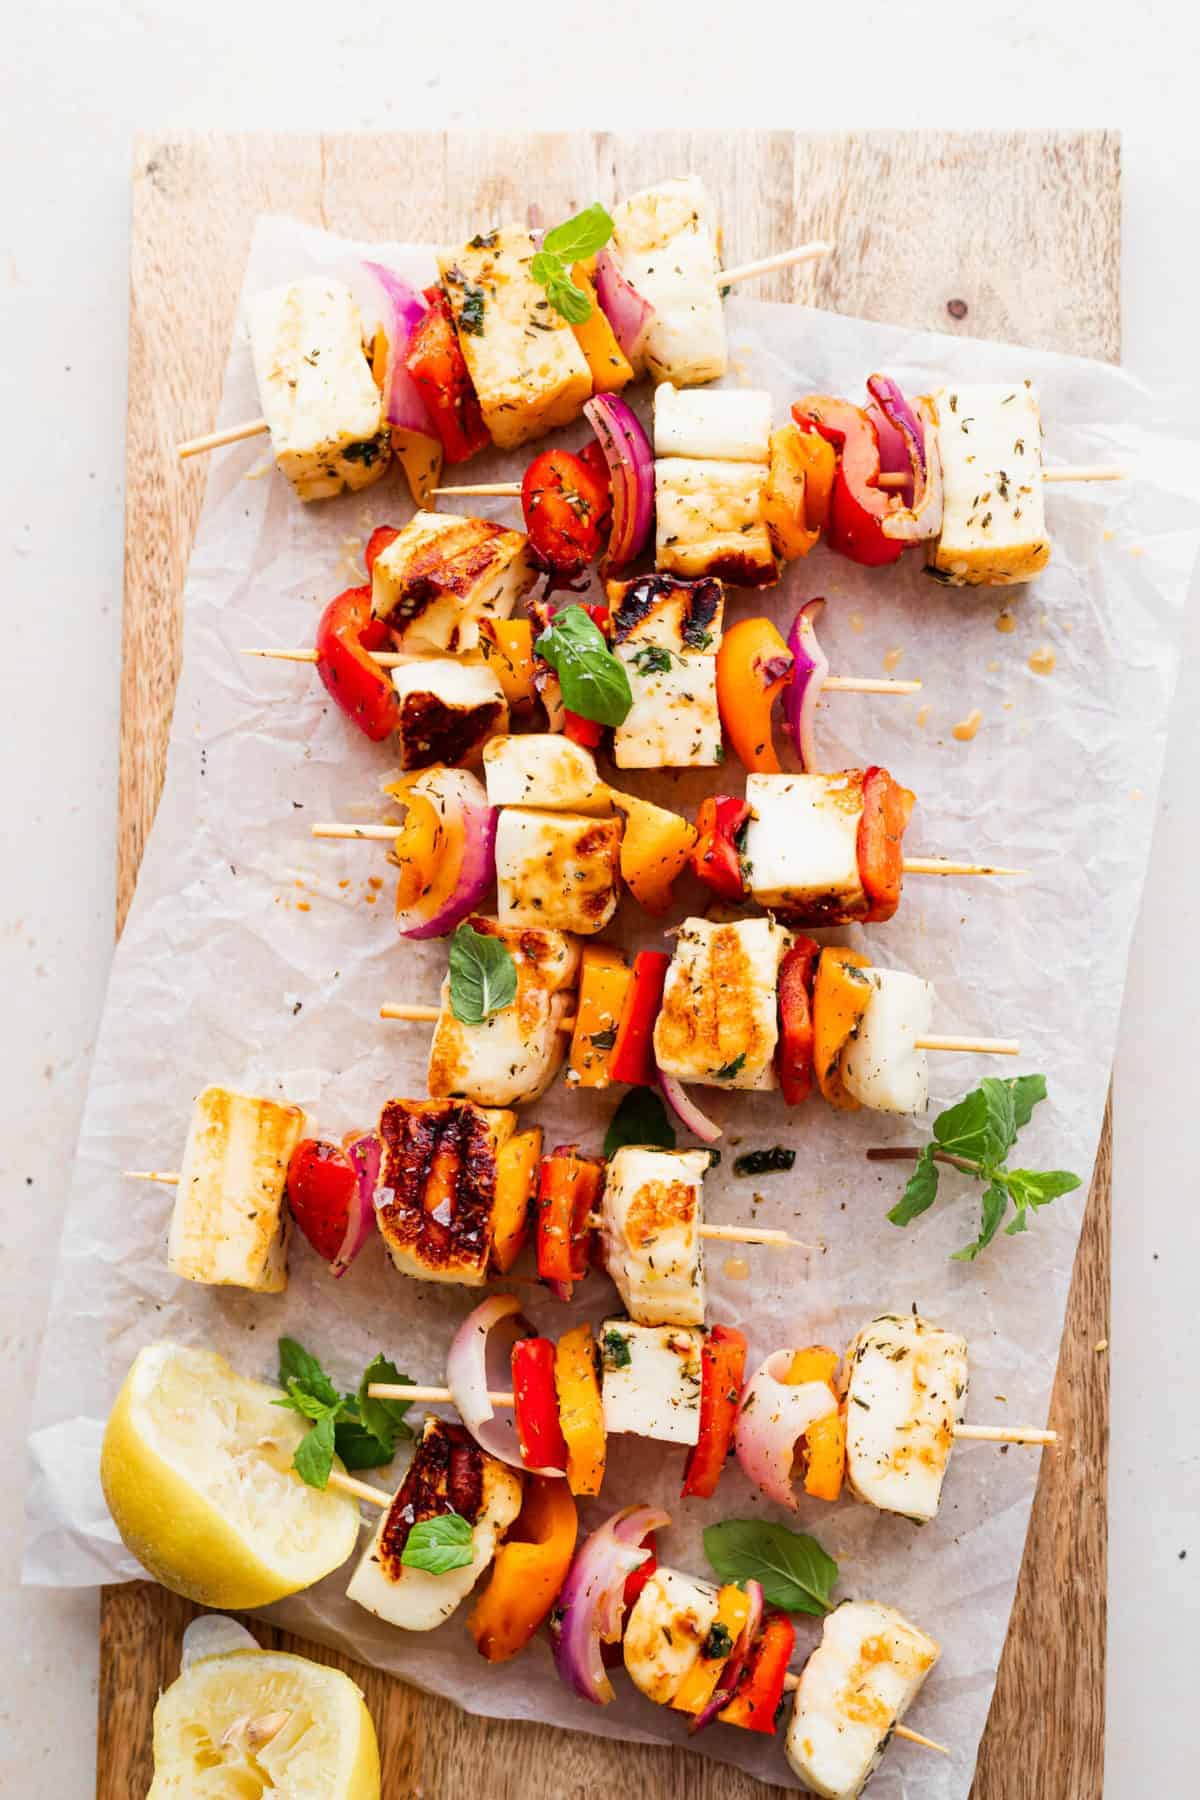 Grilled Halloumi Skewers (w/ za'atar marinade!) - The Cheese Knees